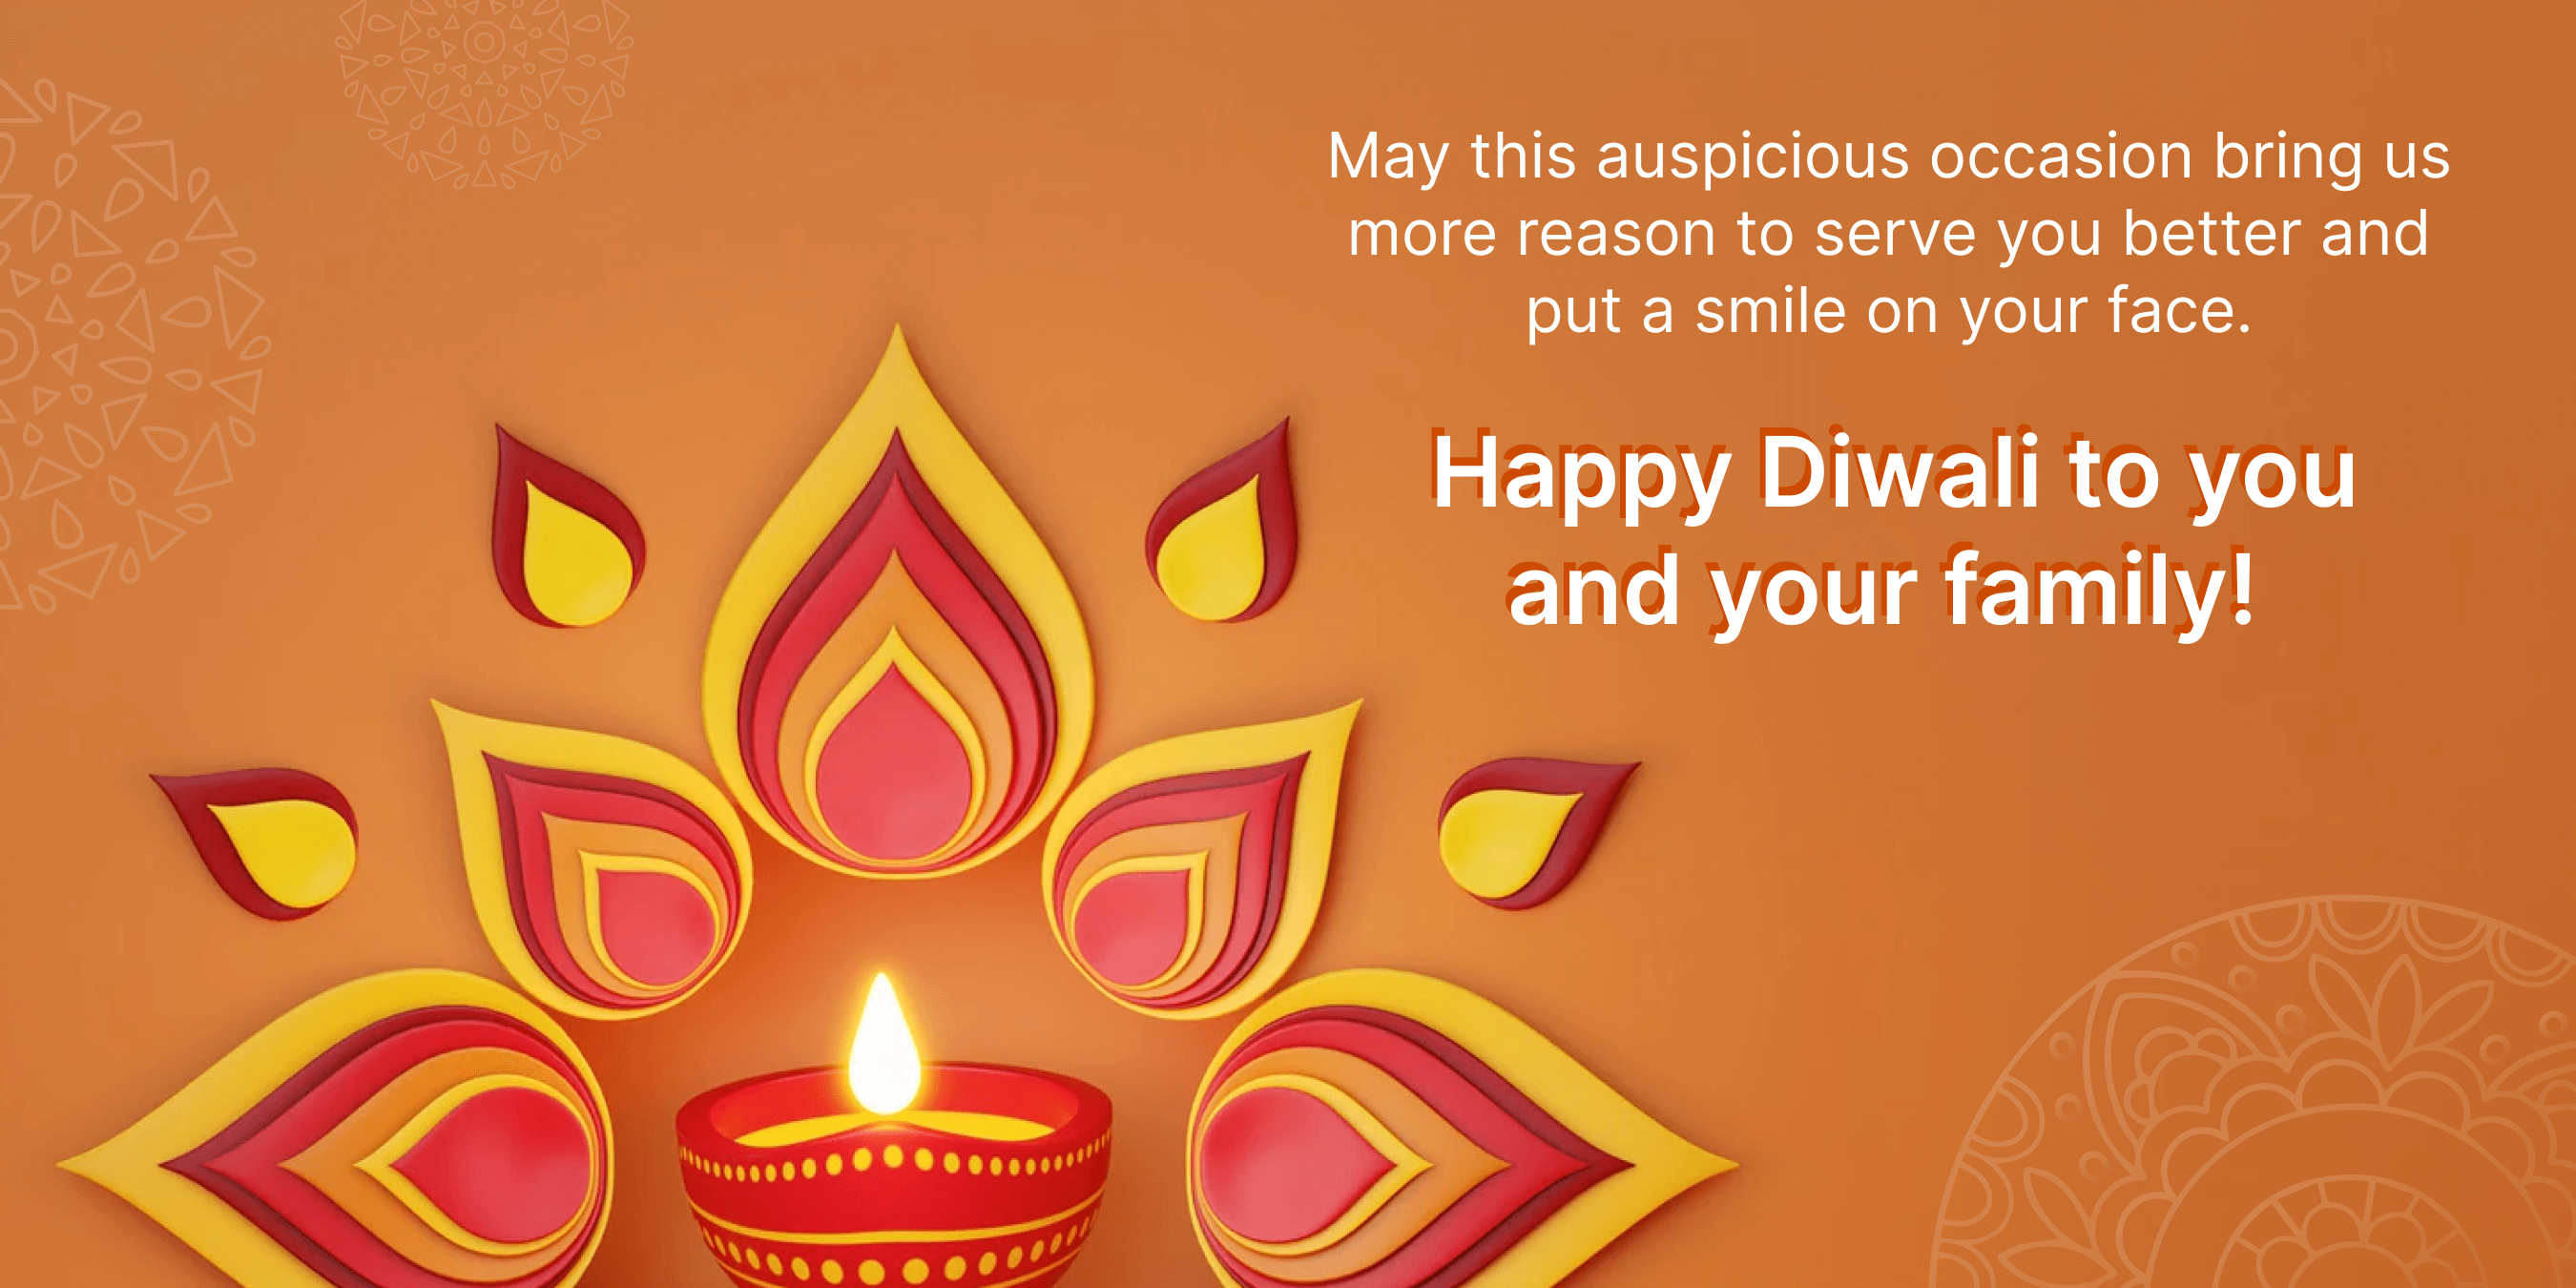 Best Diwali Wishes for Customers